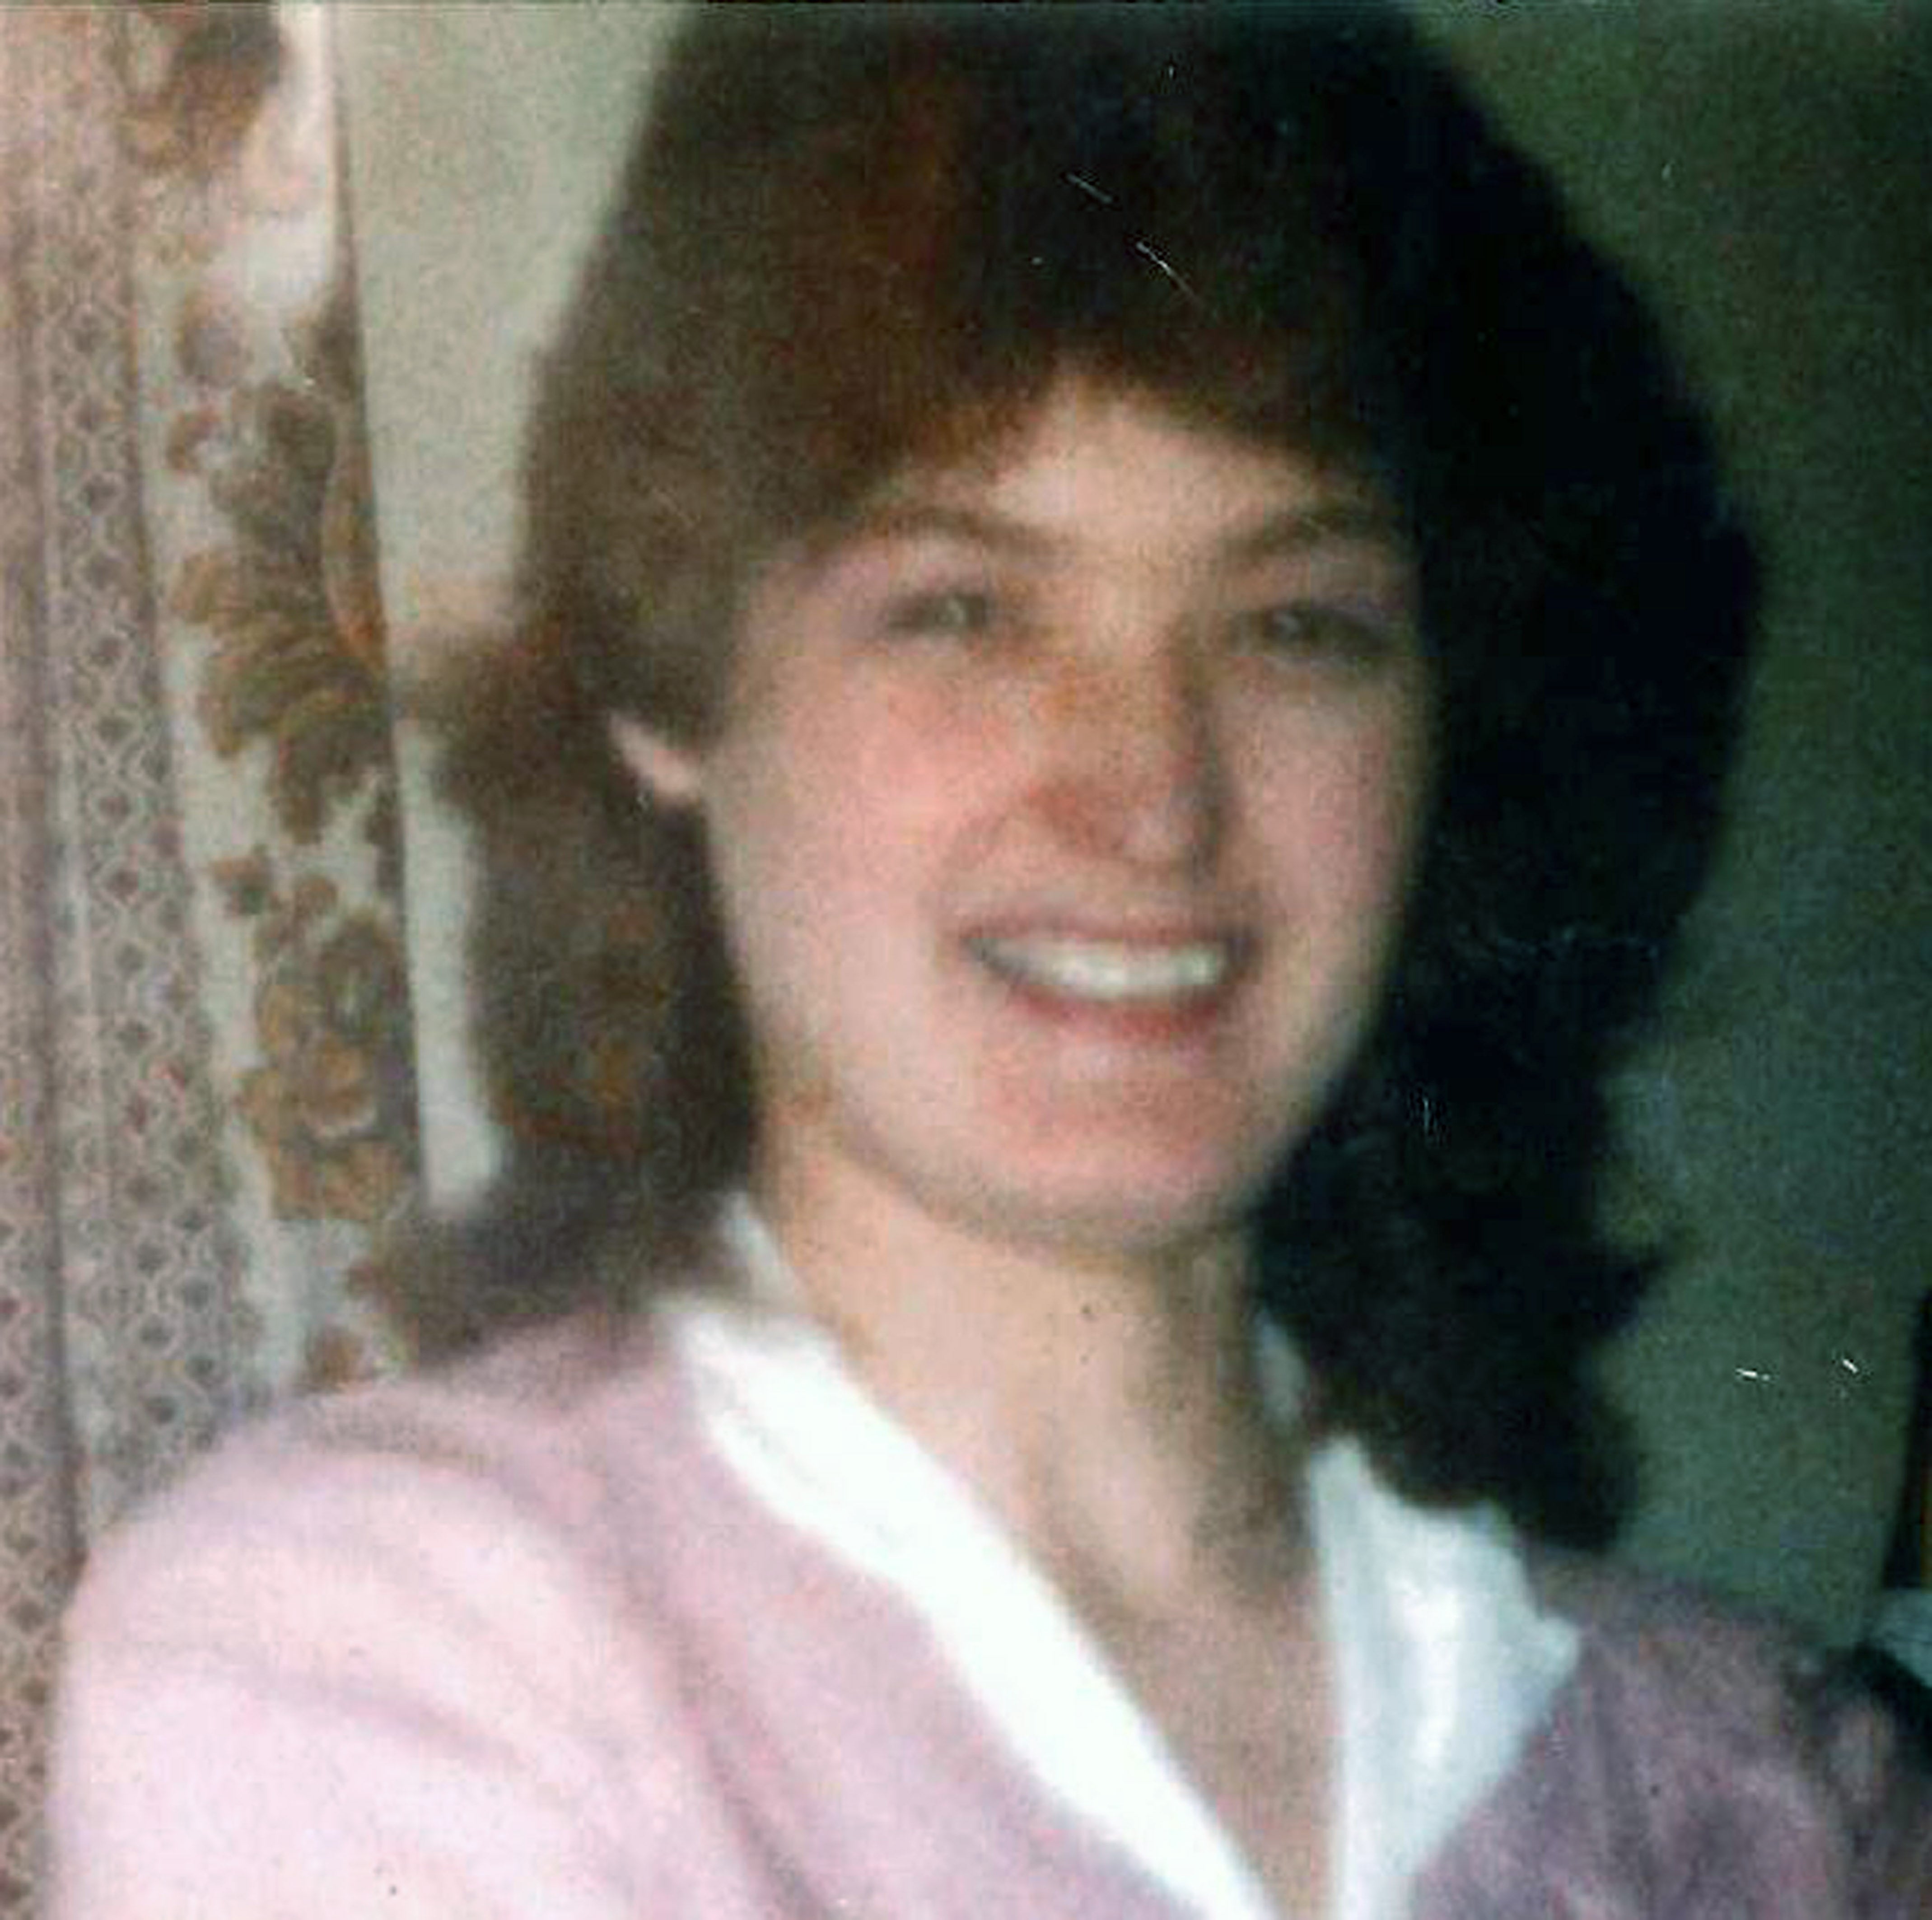 Wendy Knell, who was one of two women murdered by David Fuller